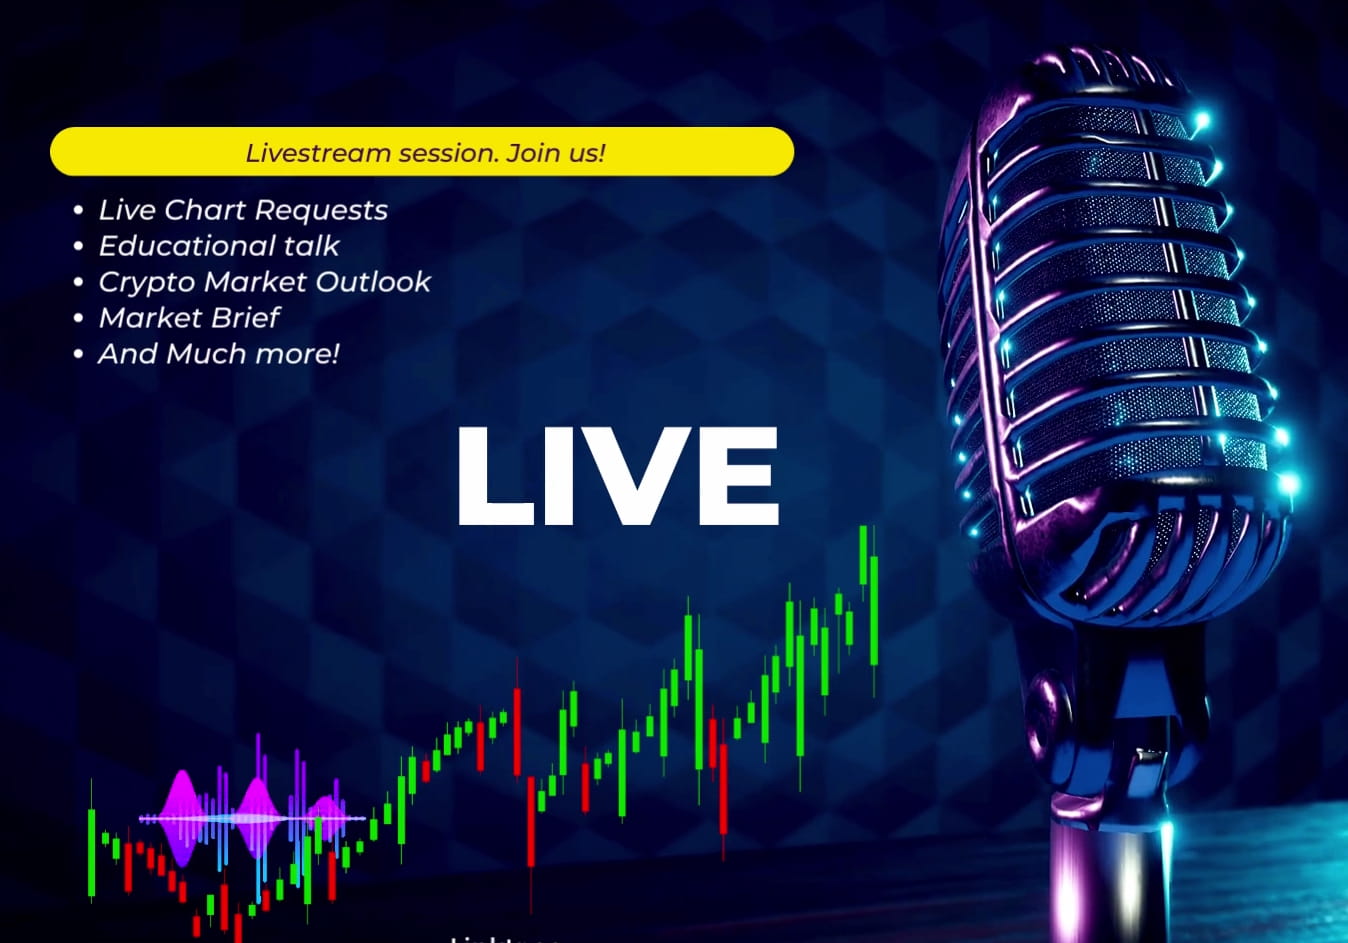 LIVE #CRYPTO CHART REQUEST N°1